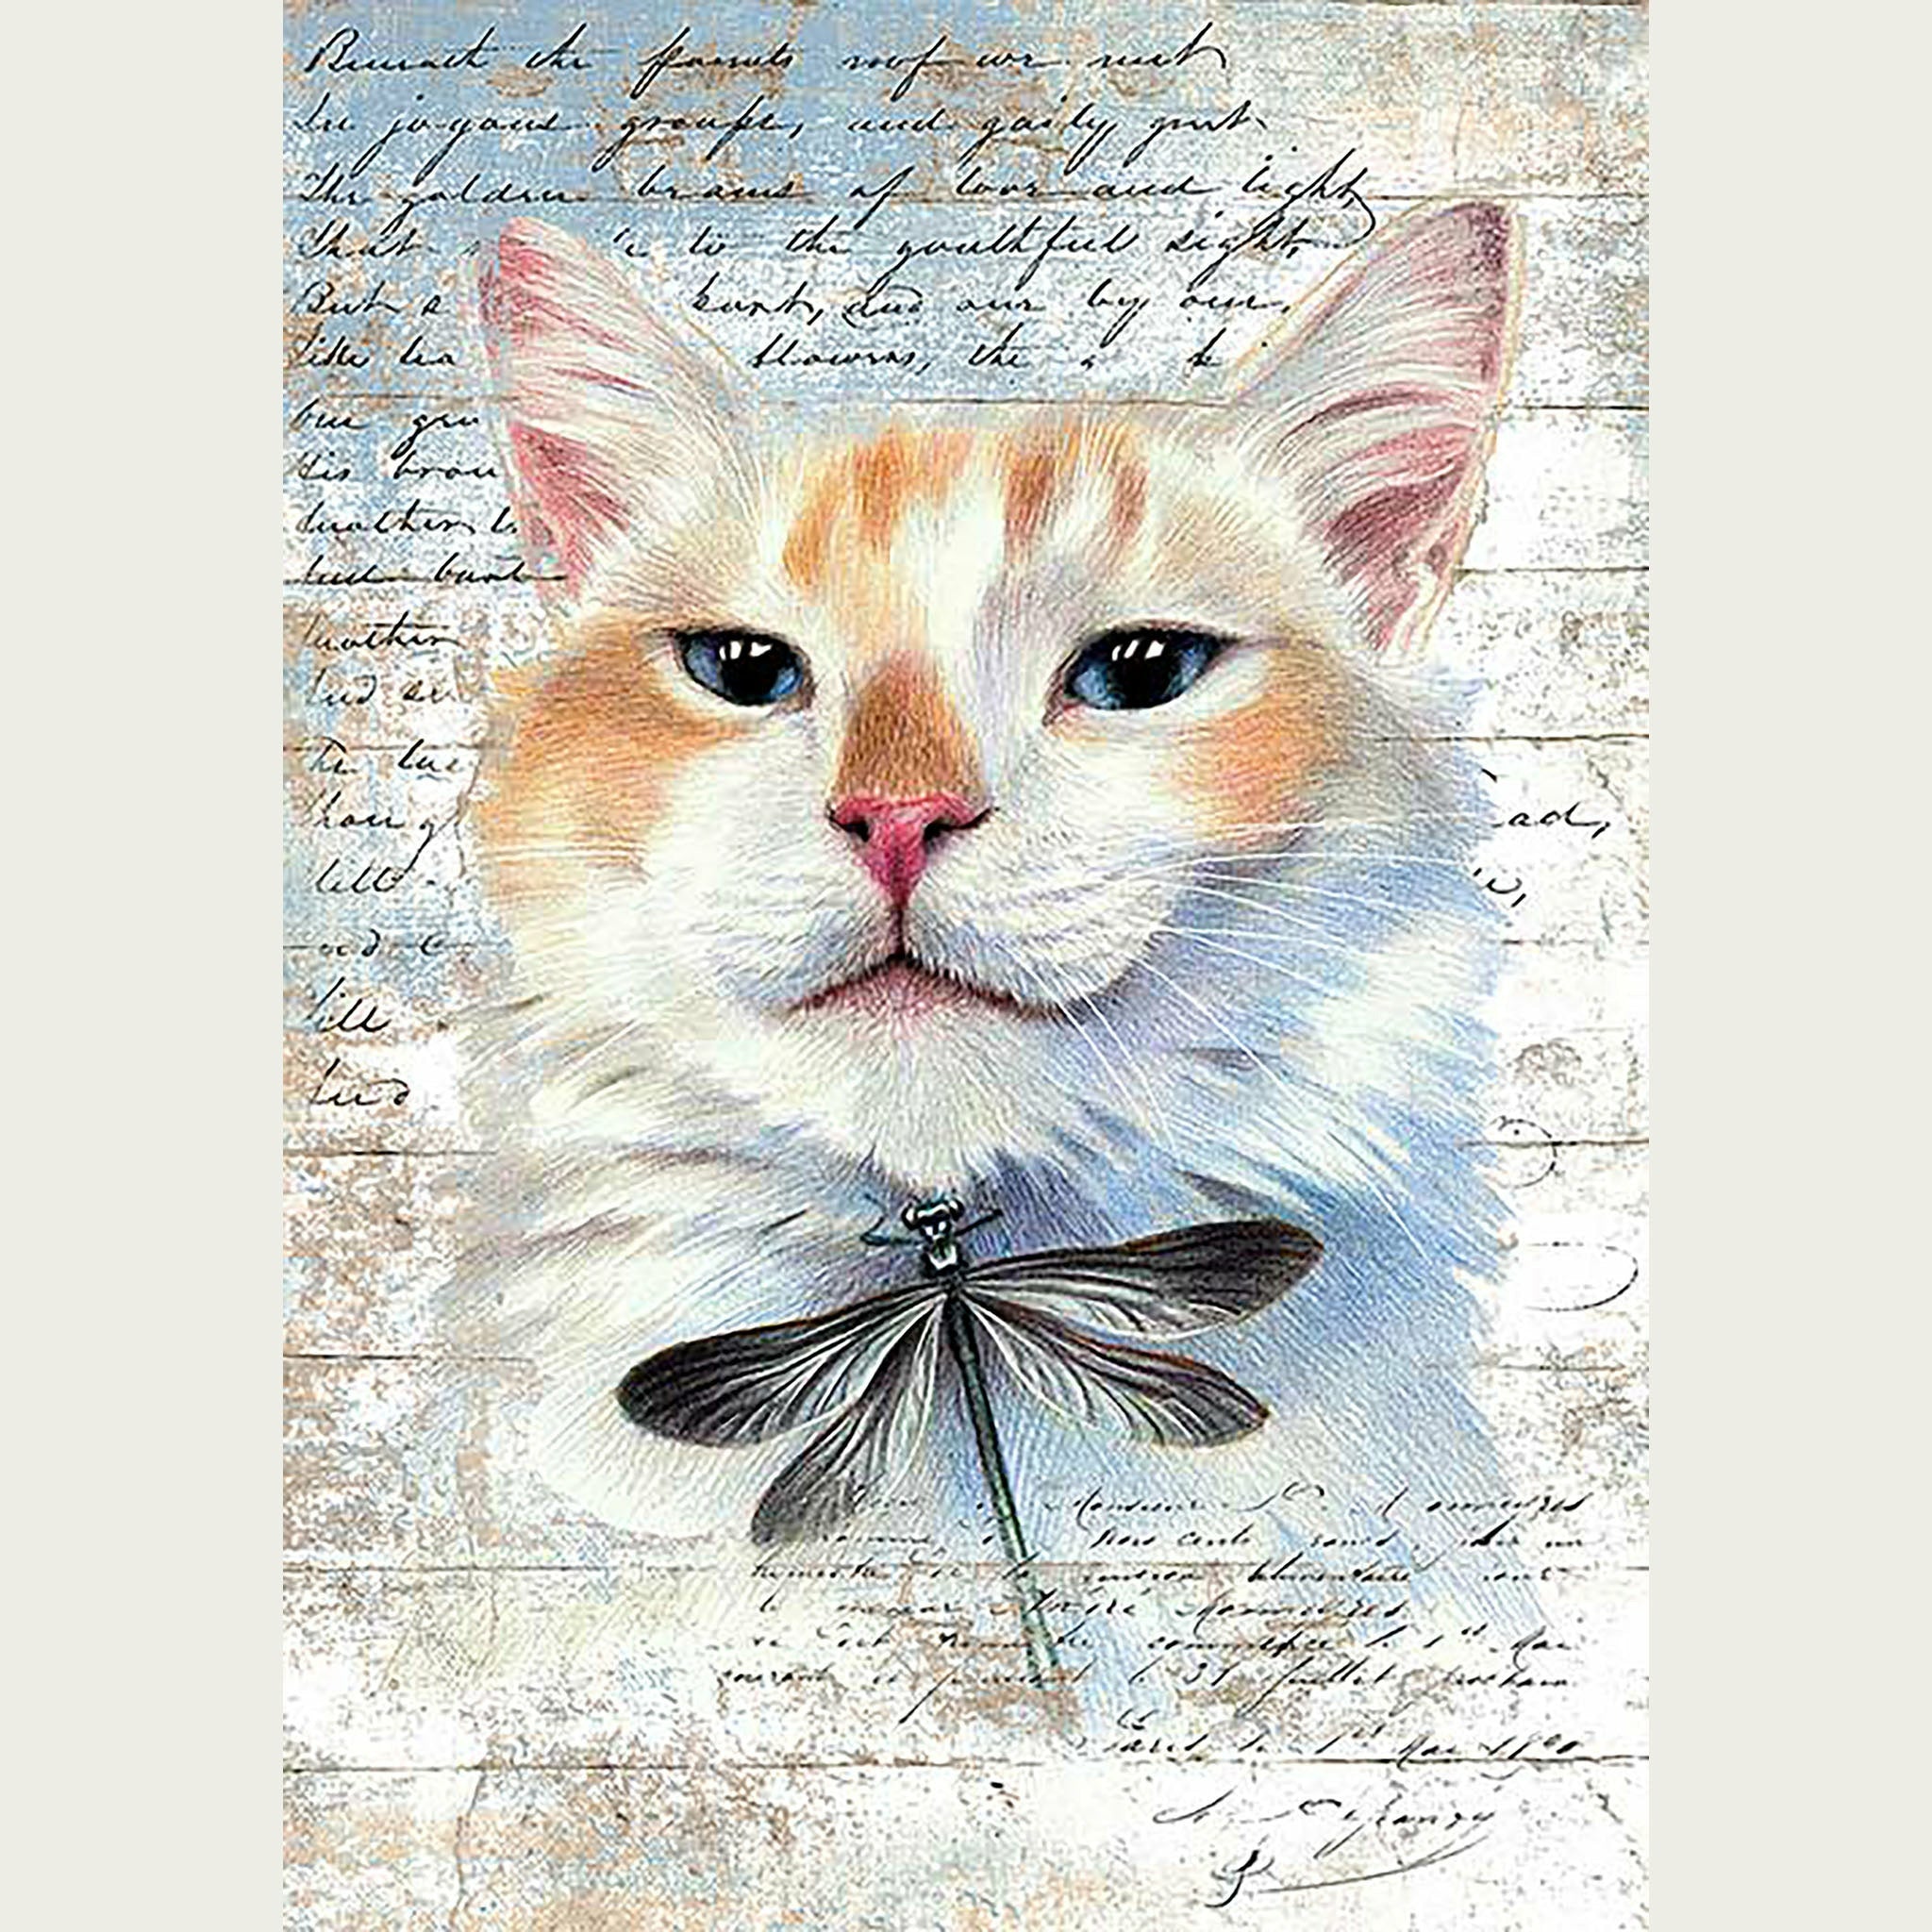 A colorful cat and dragonfly on a cursive text background rice paper designs. Off white borders on the sides.